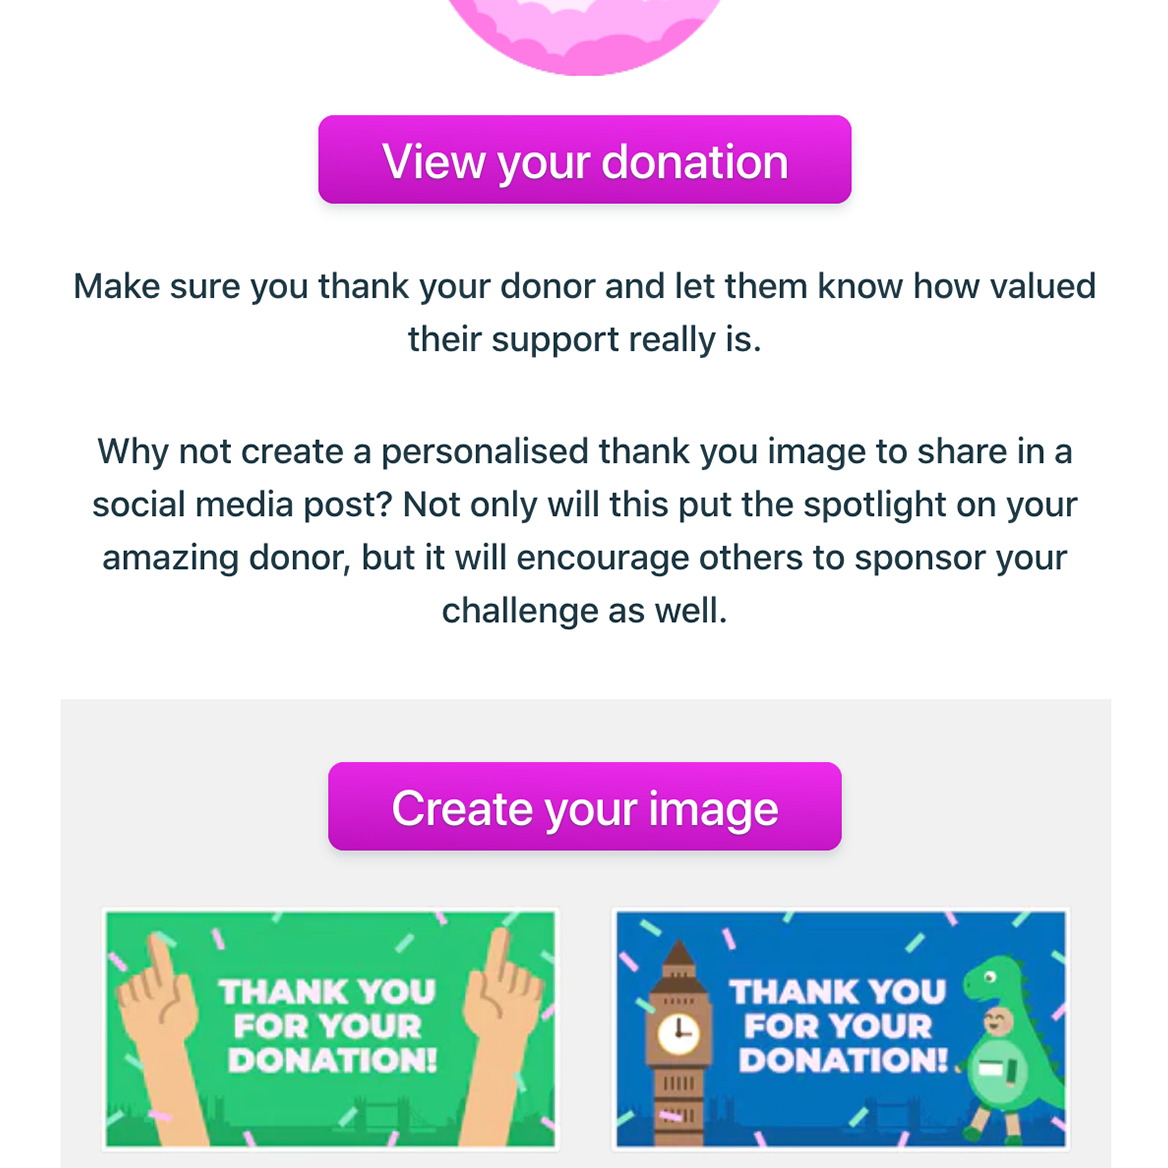 Preview: Transactional - First donation